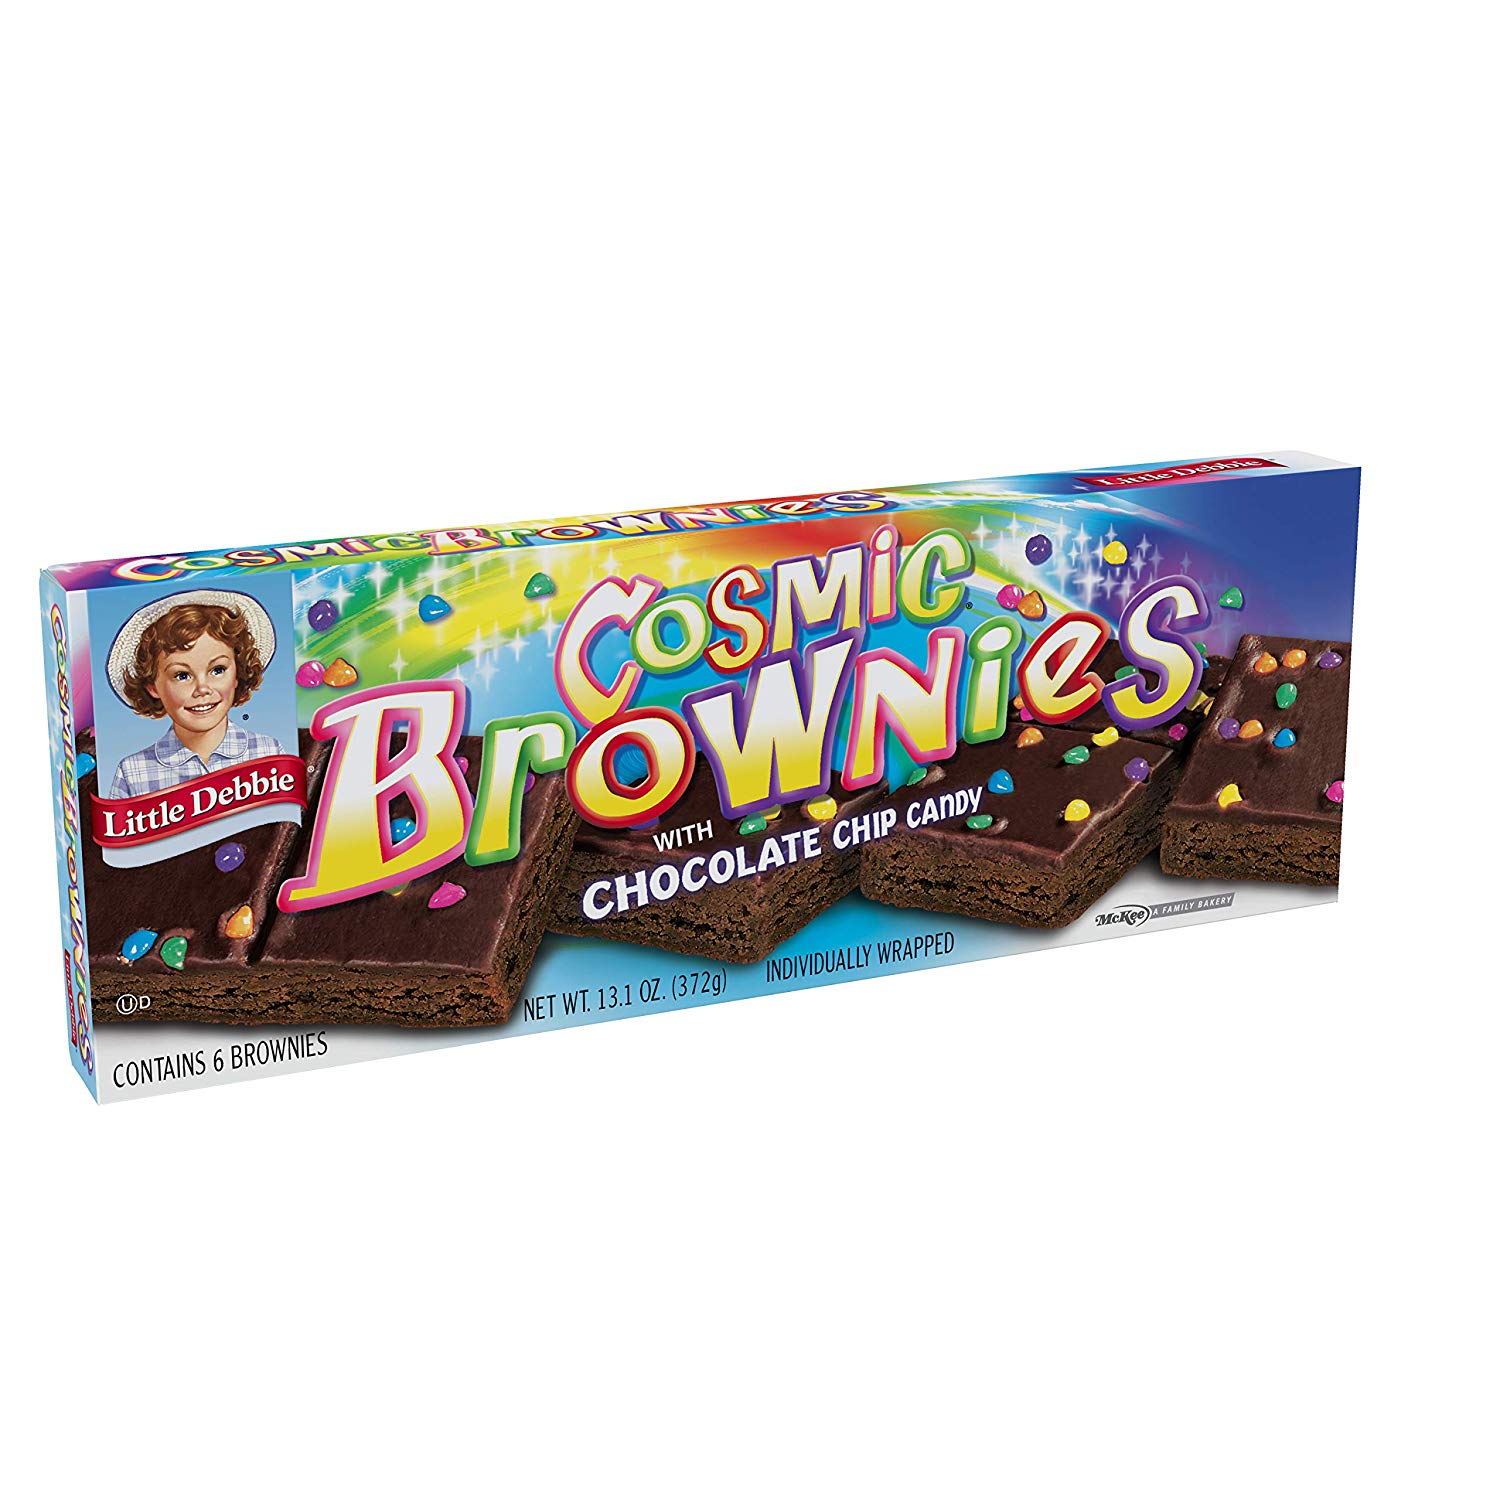 Little Debbie COSMIC Brownies Only $1.76! - Become a Coupon Queen